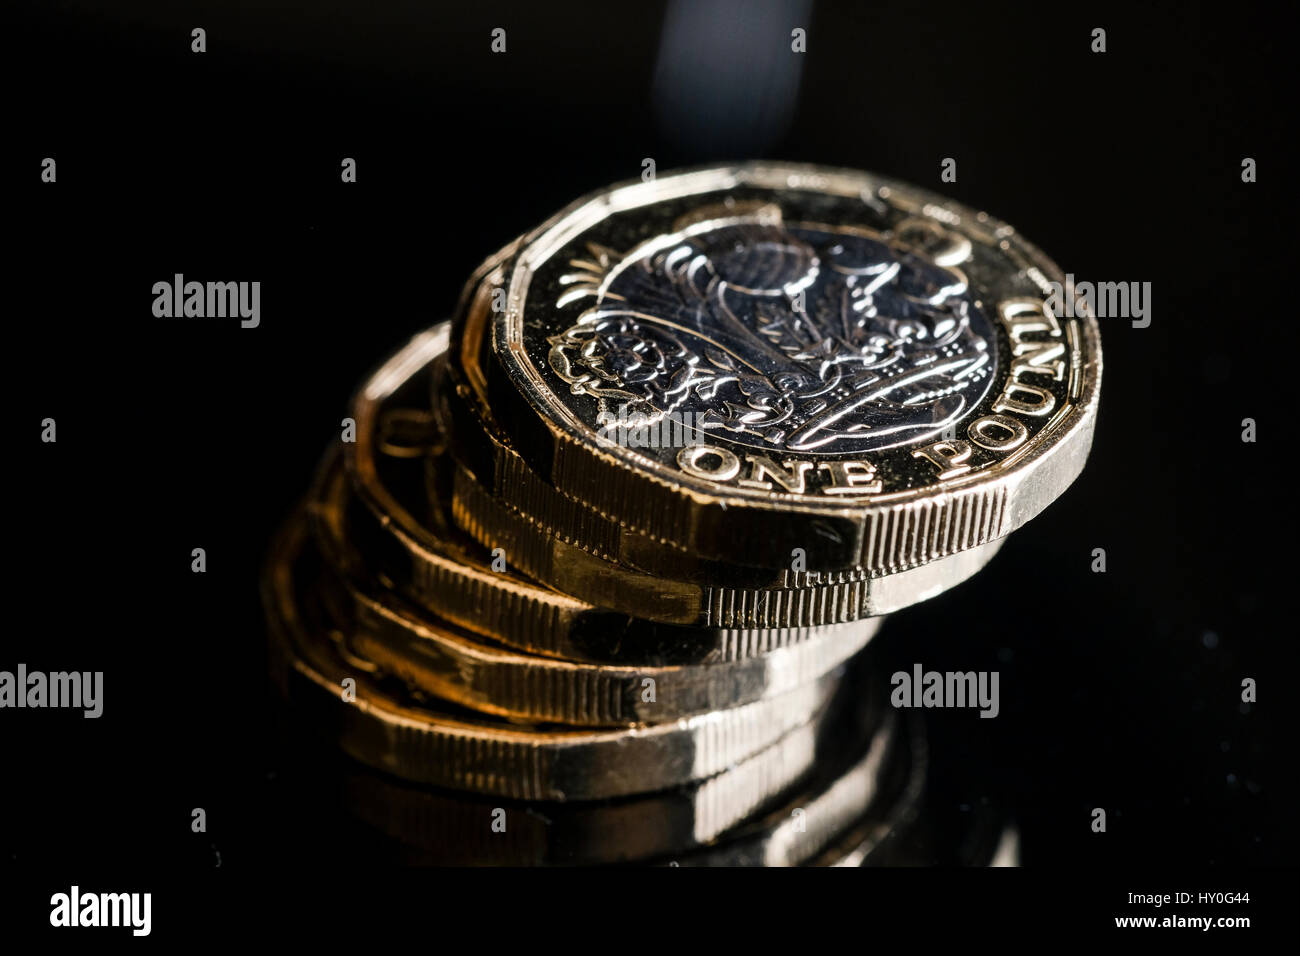 2017 new pound coins against black background Stock Photo